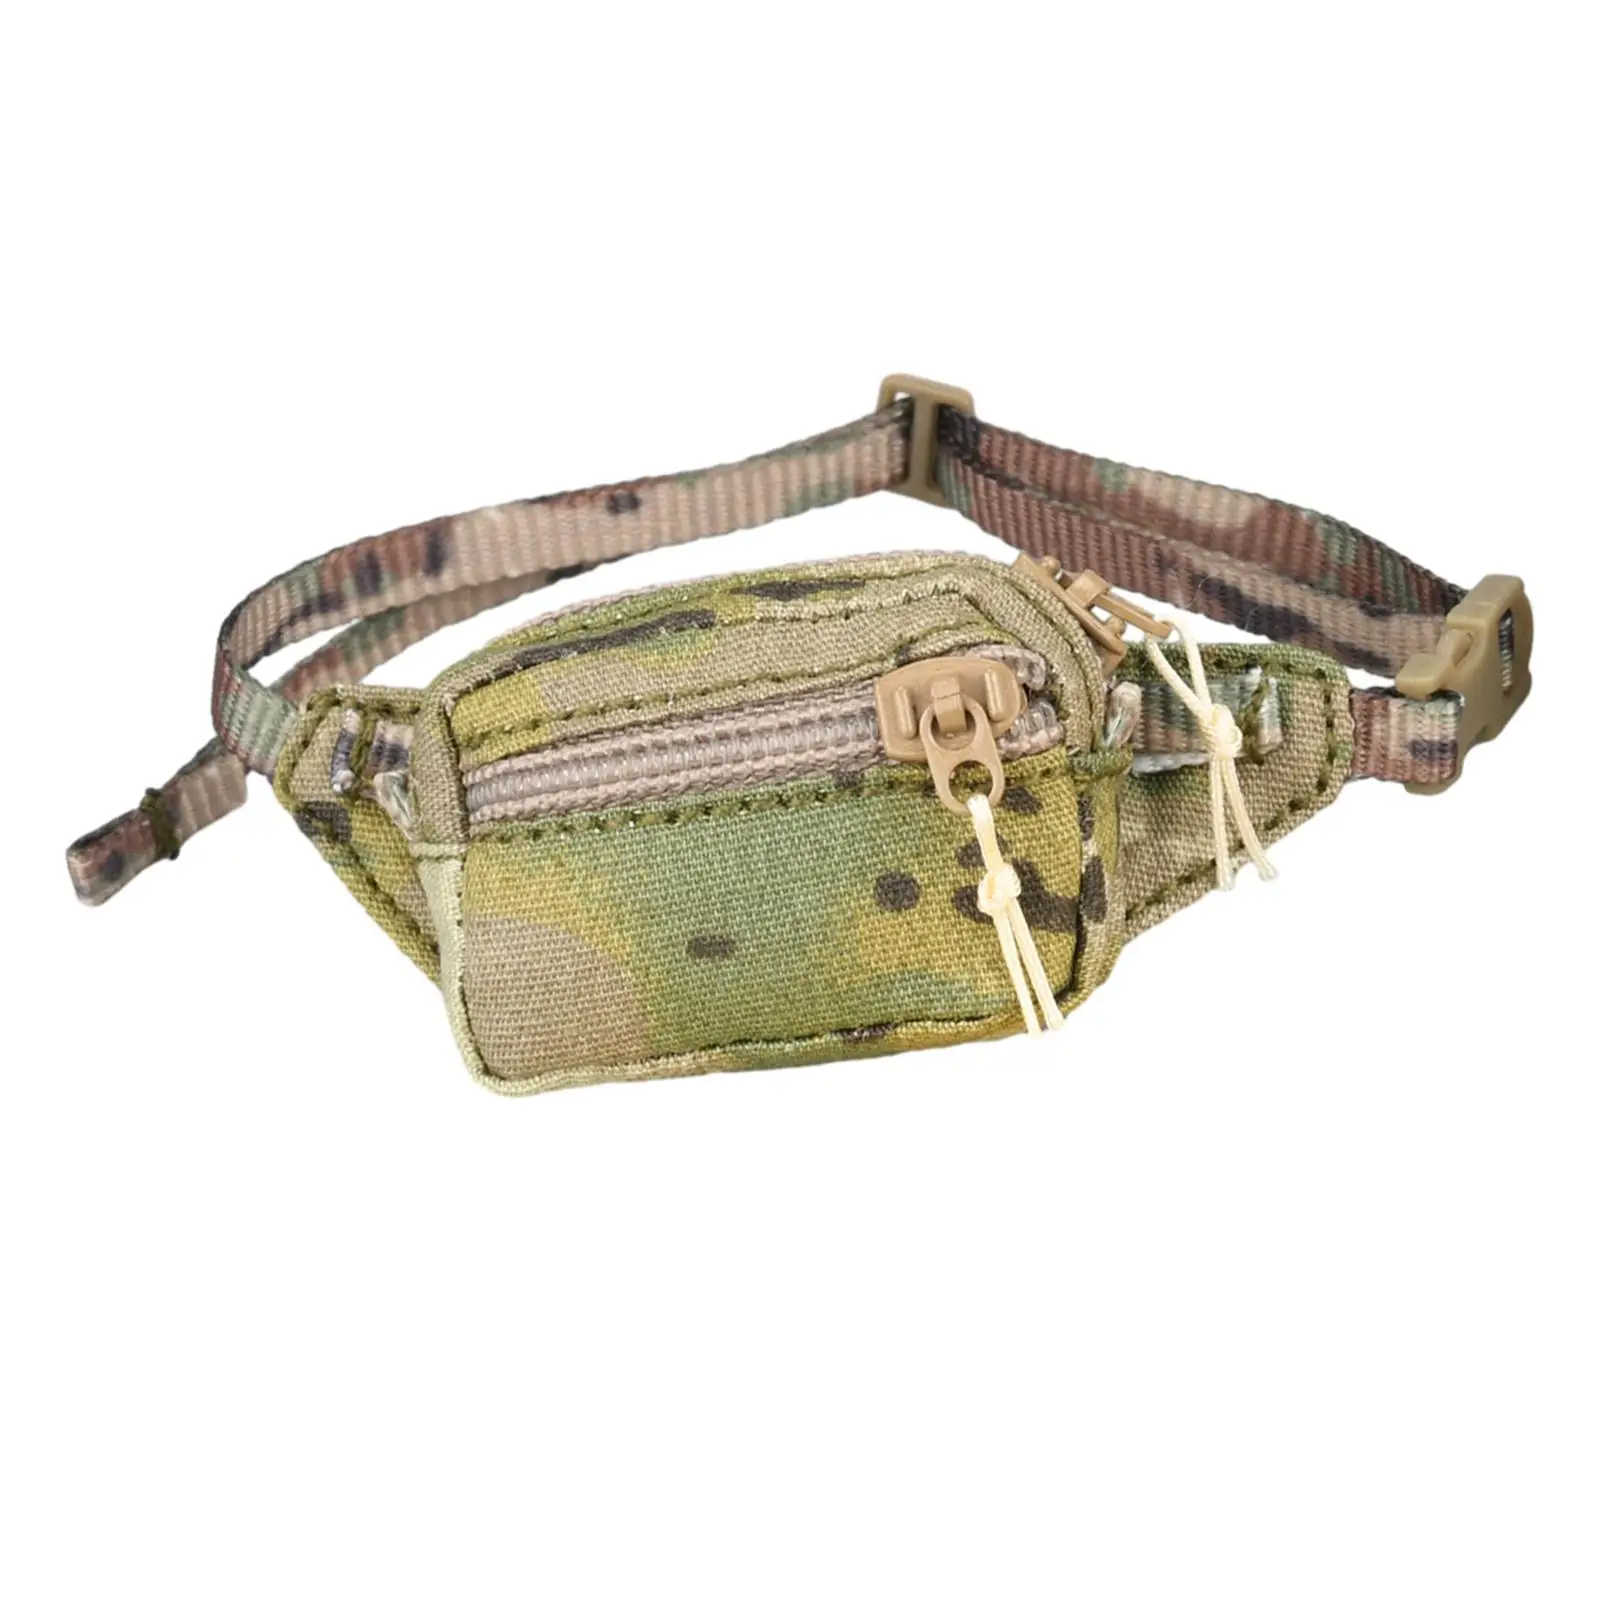 1/6 Soldier Waist Bag Classic Stylish Kids Pretend Play Waist Tools Bag for 12 inch Male Collectable Action Figure Accessory